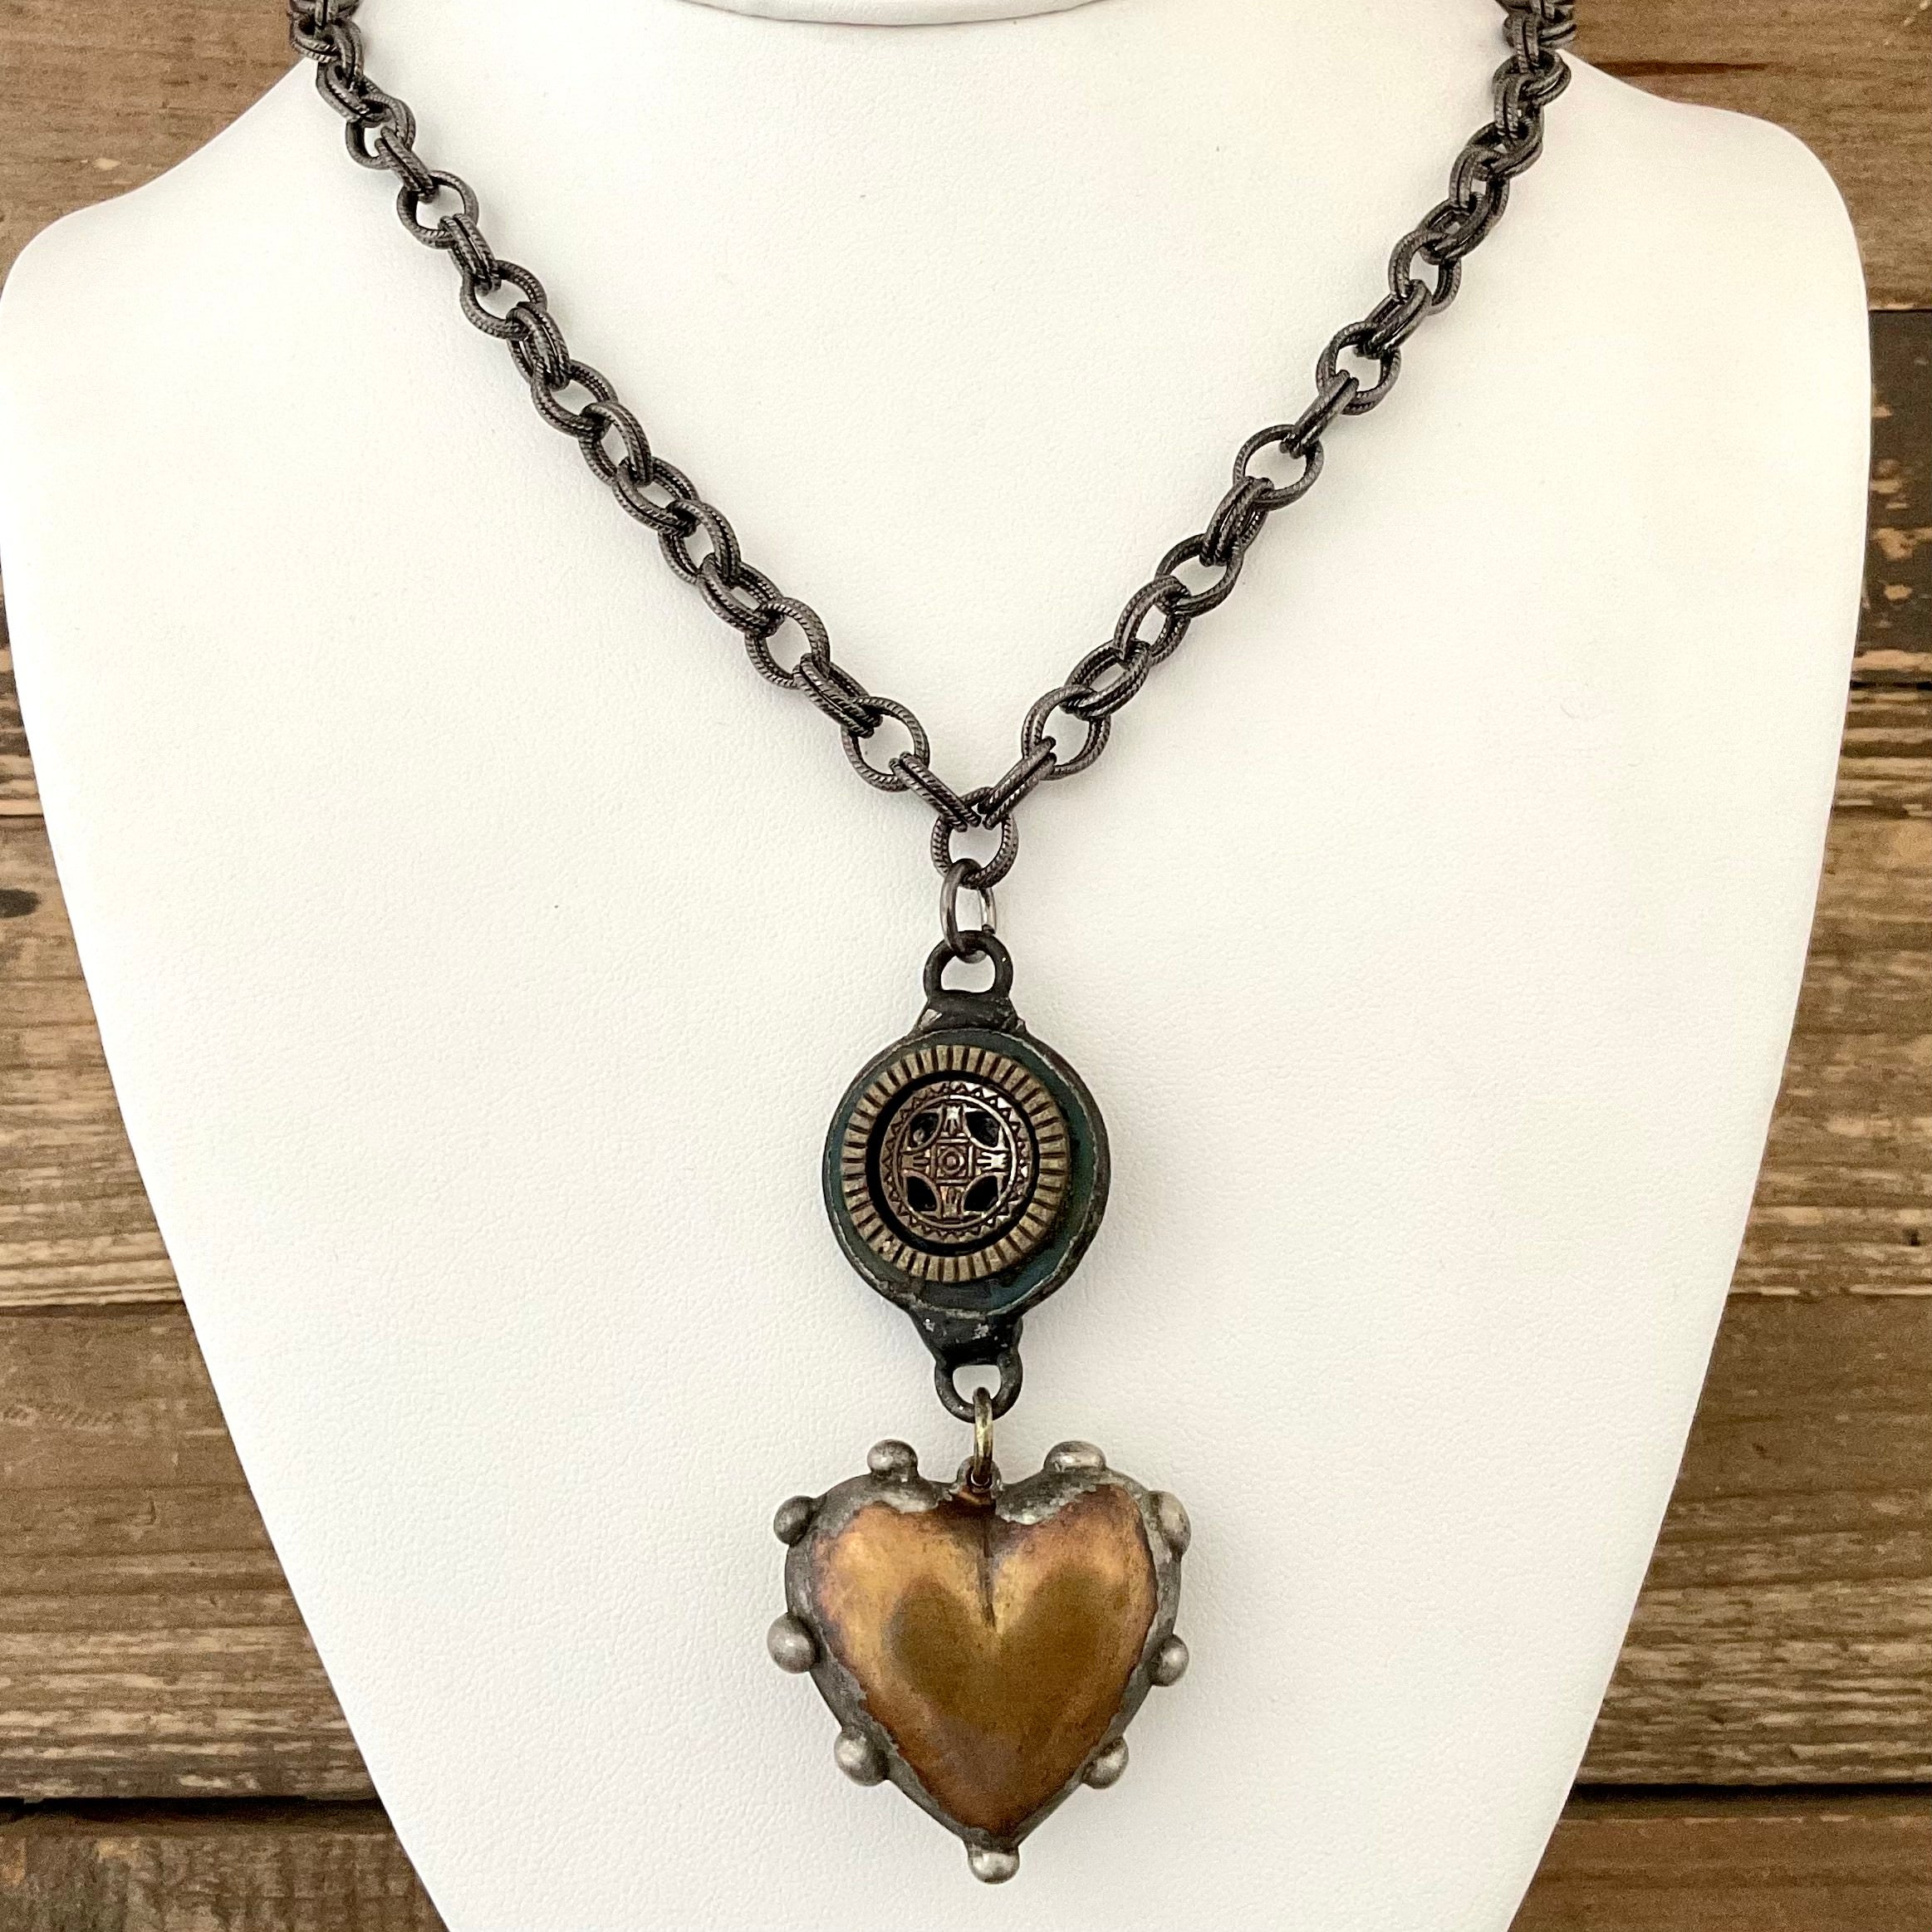 Vintage Chain with Connector & Soldered Heart Pendant 34"